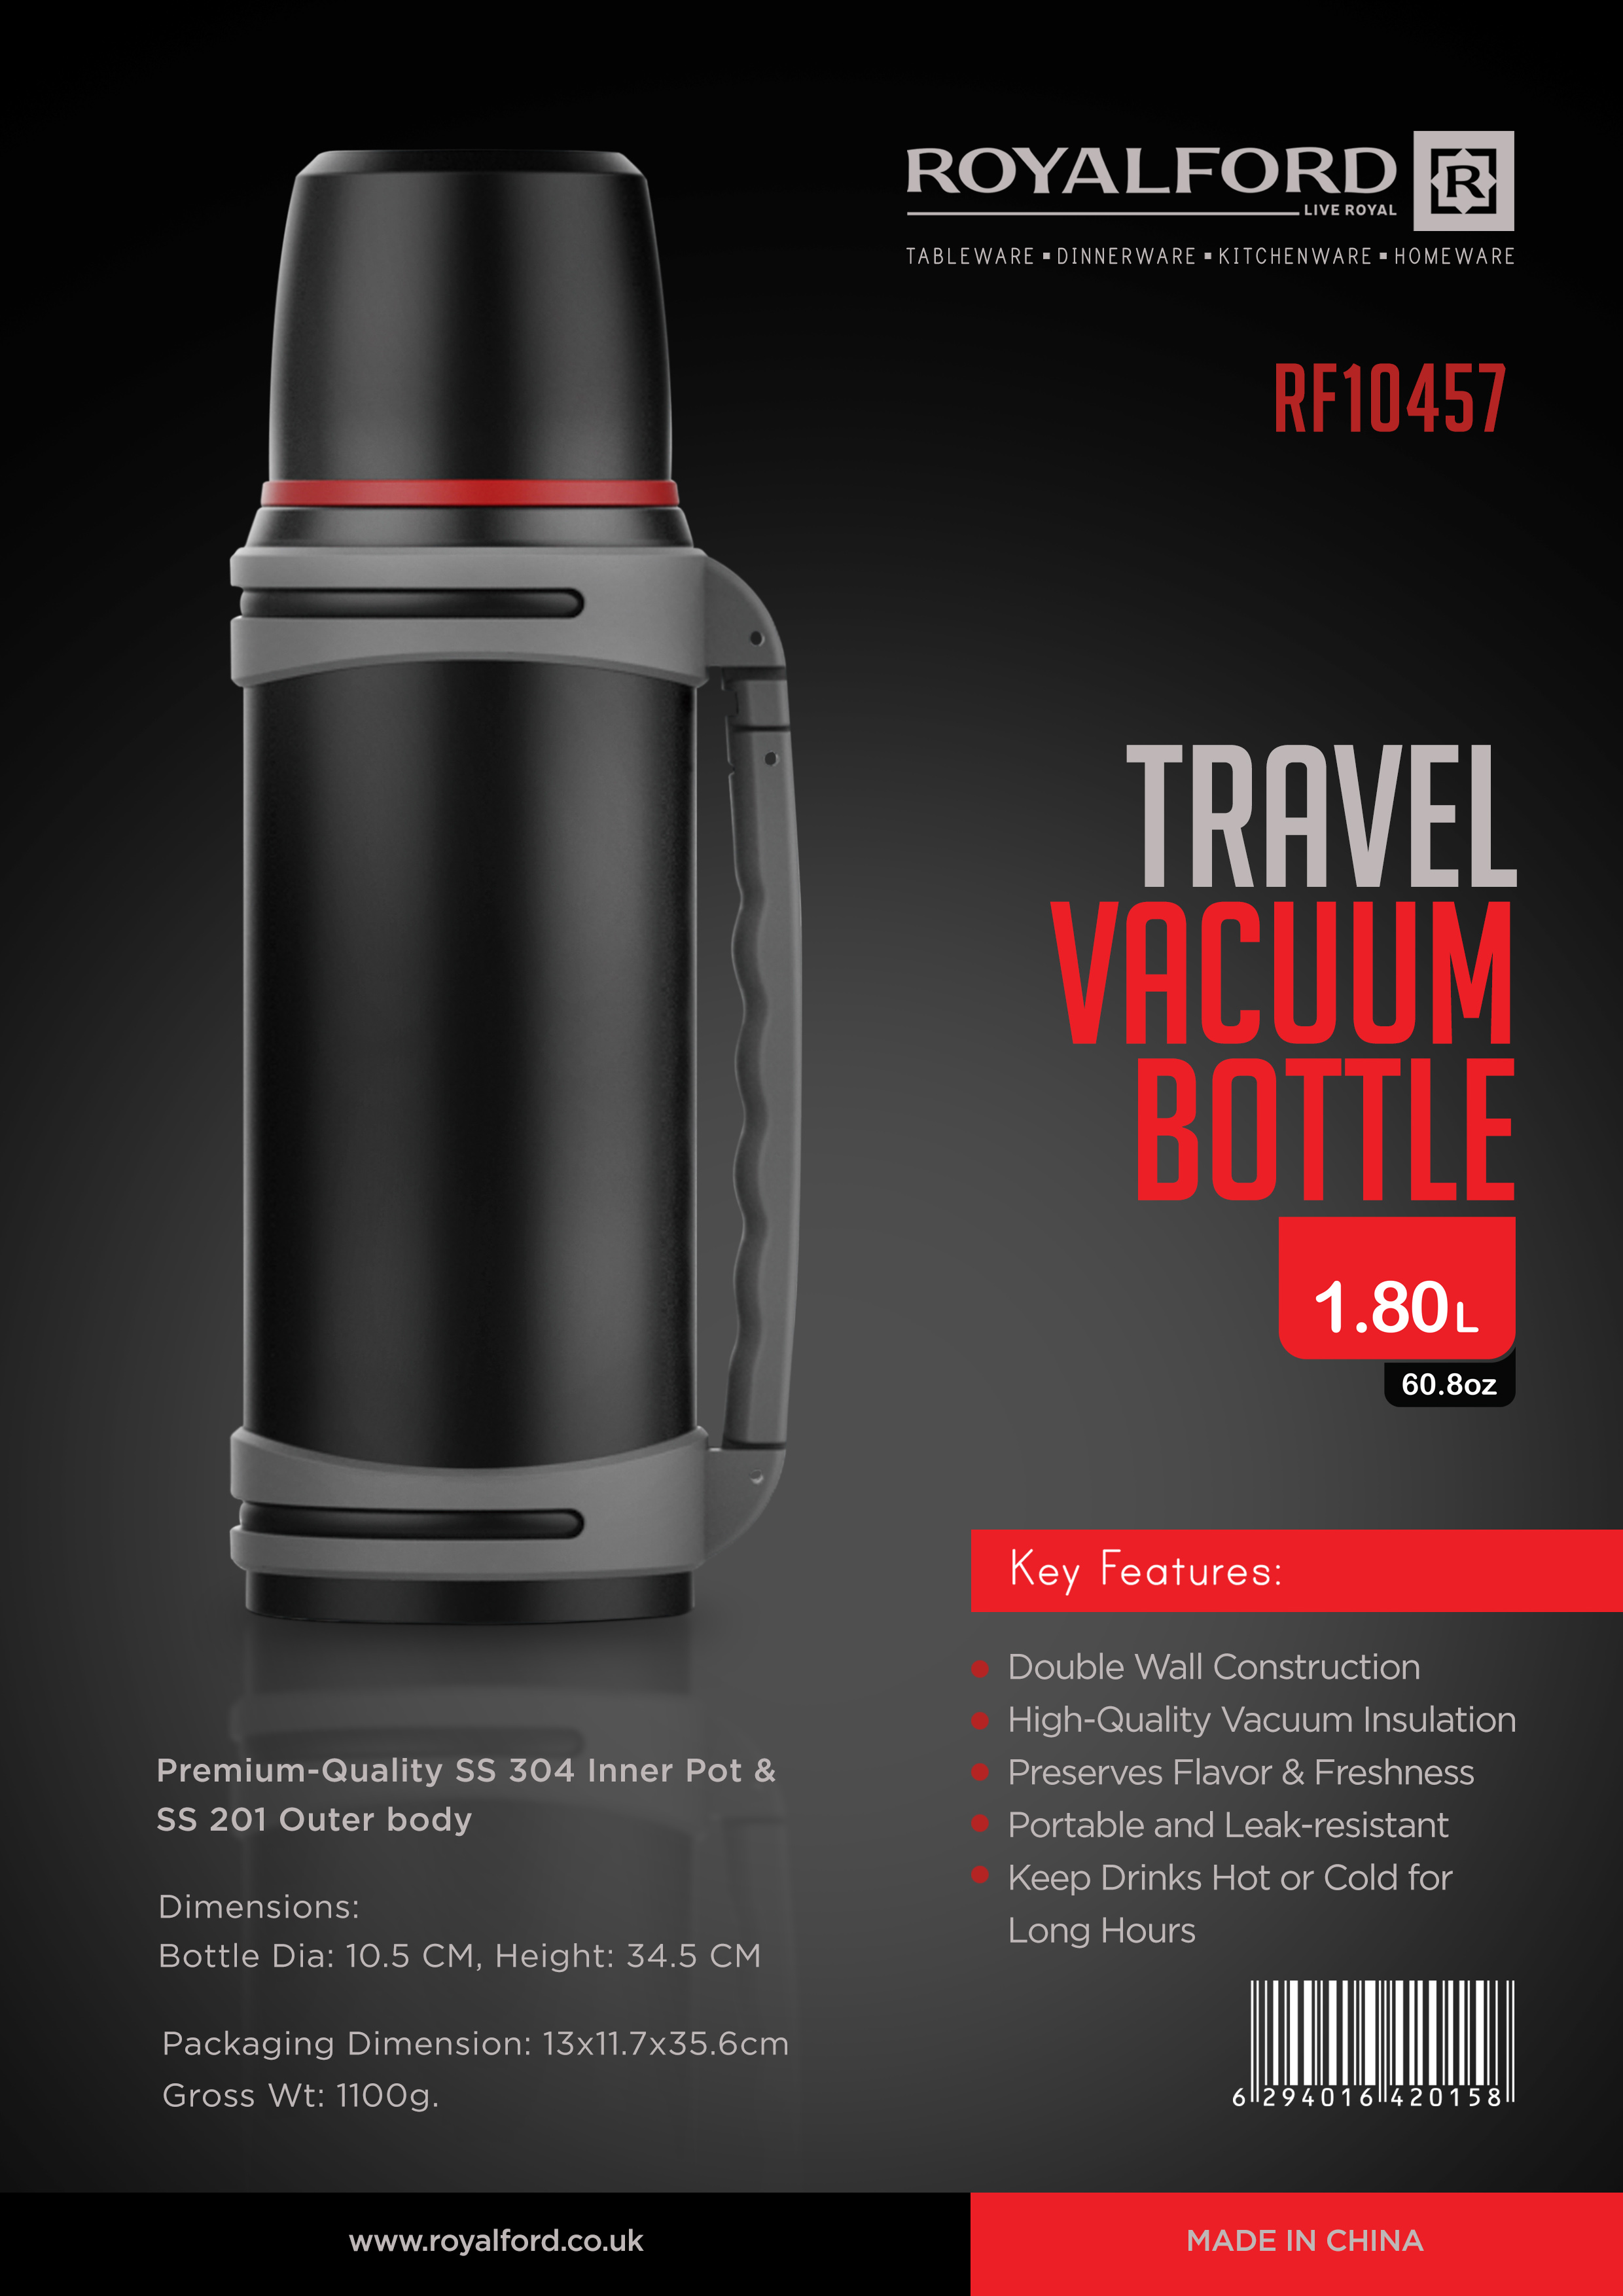 Stainless Steel Thermos Bottle Vacuum Large capacity Flasks Water Bottle  Insulated Water Outdoor travel Bottle Cup Keeping Warm